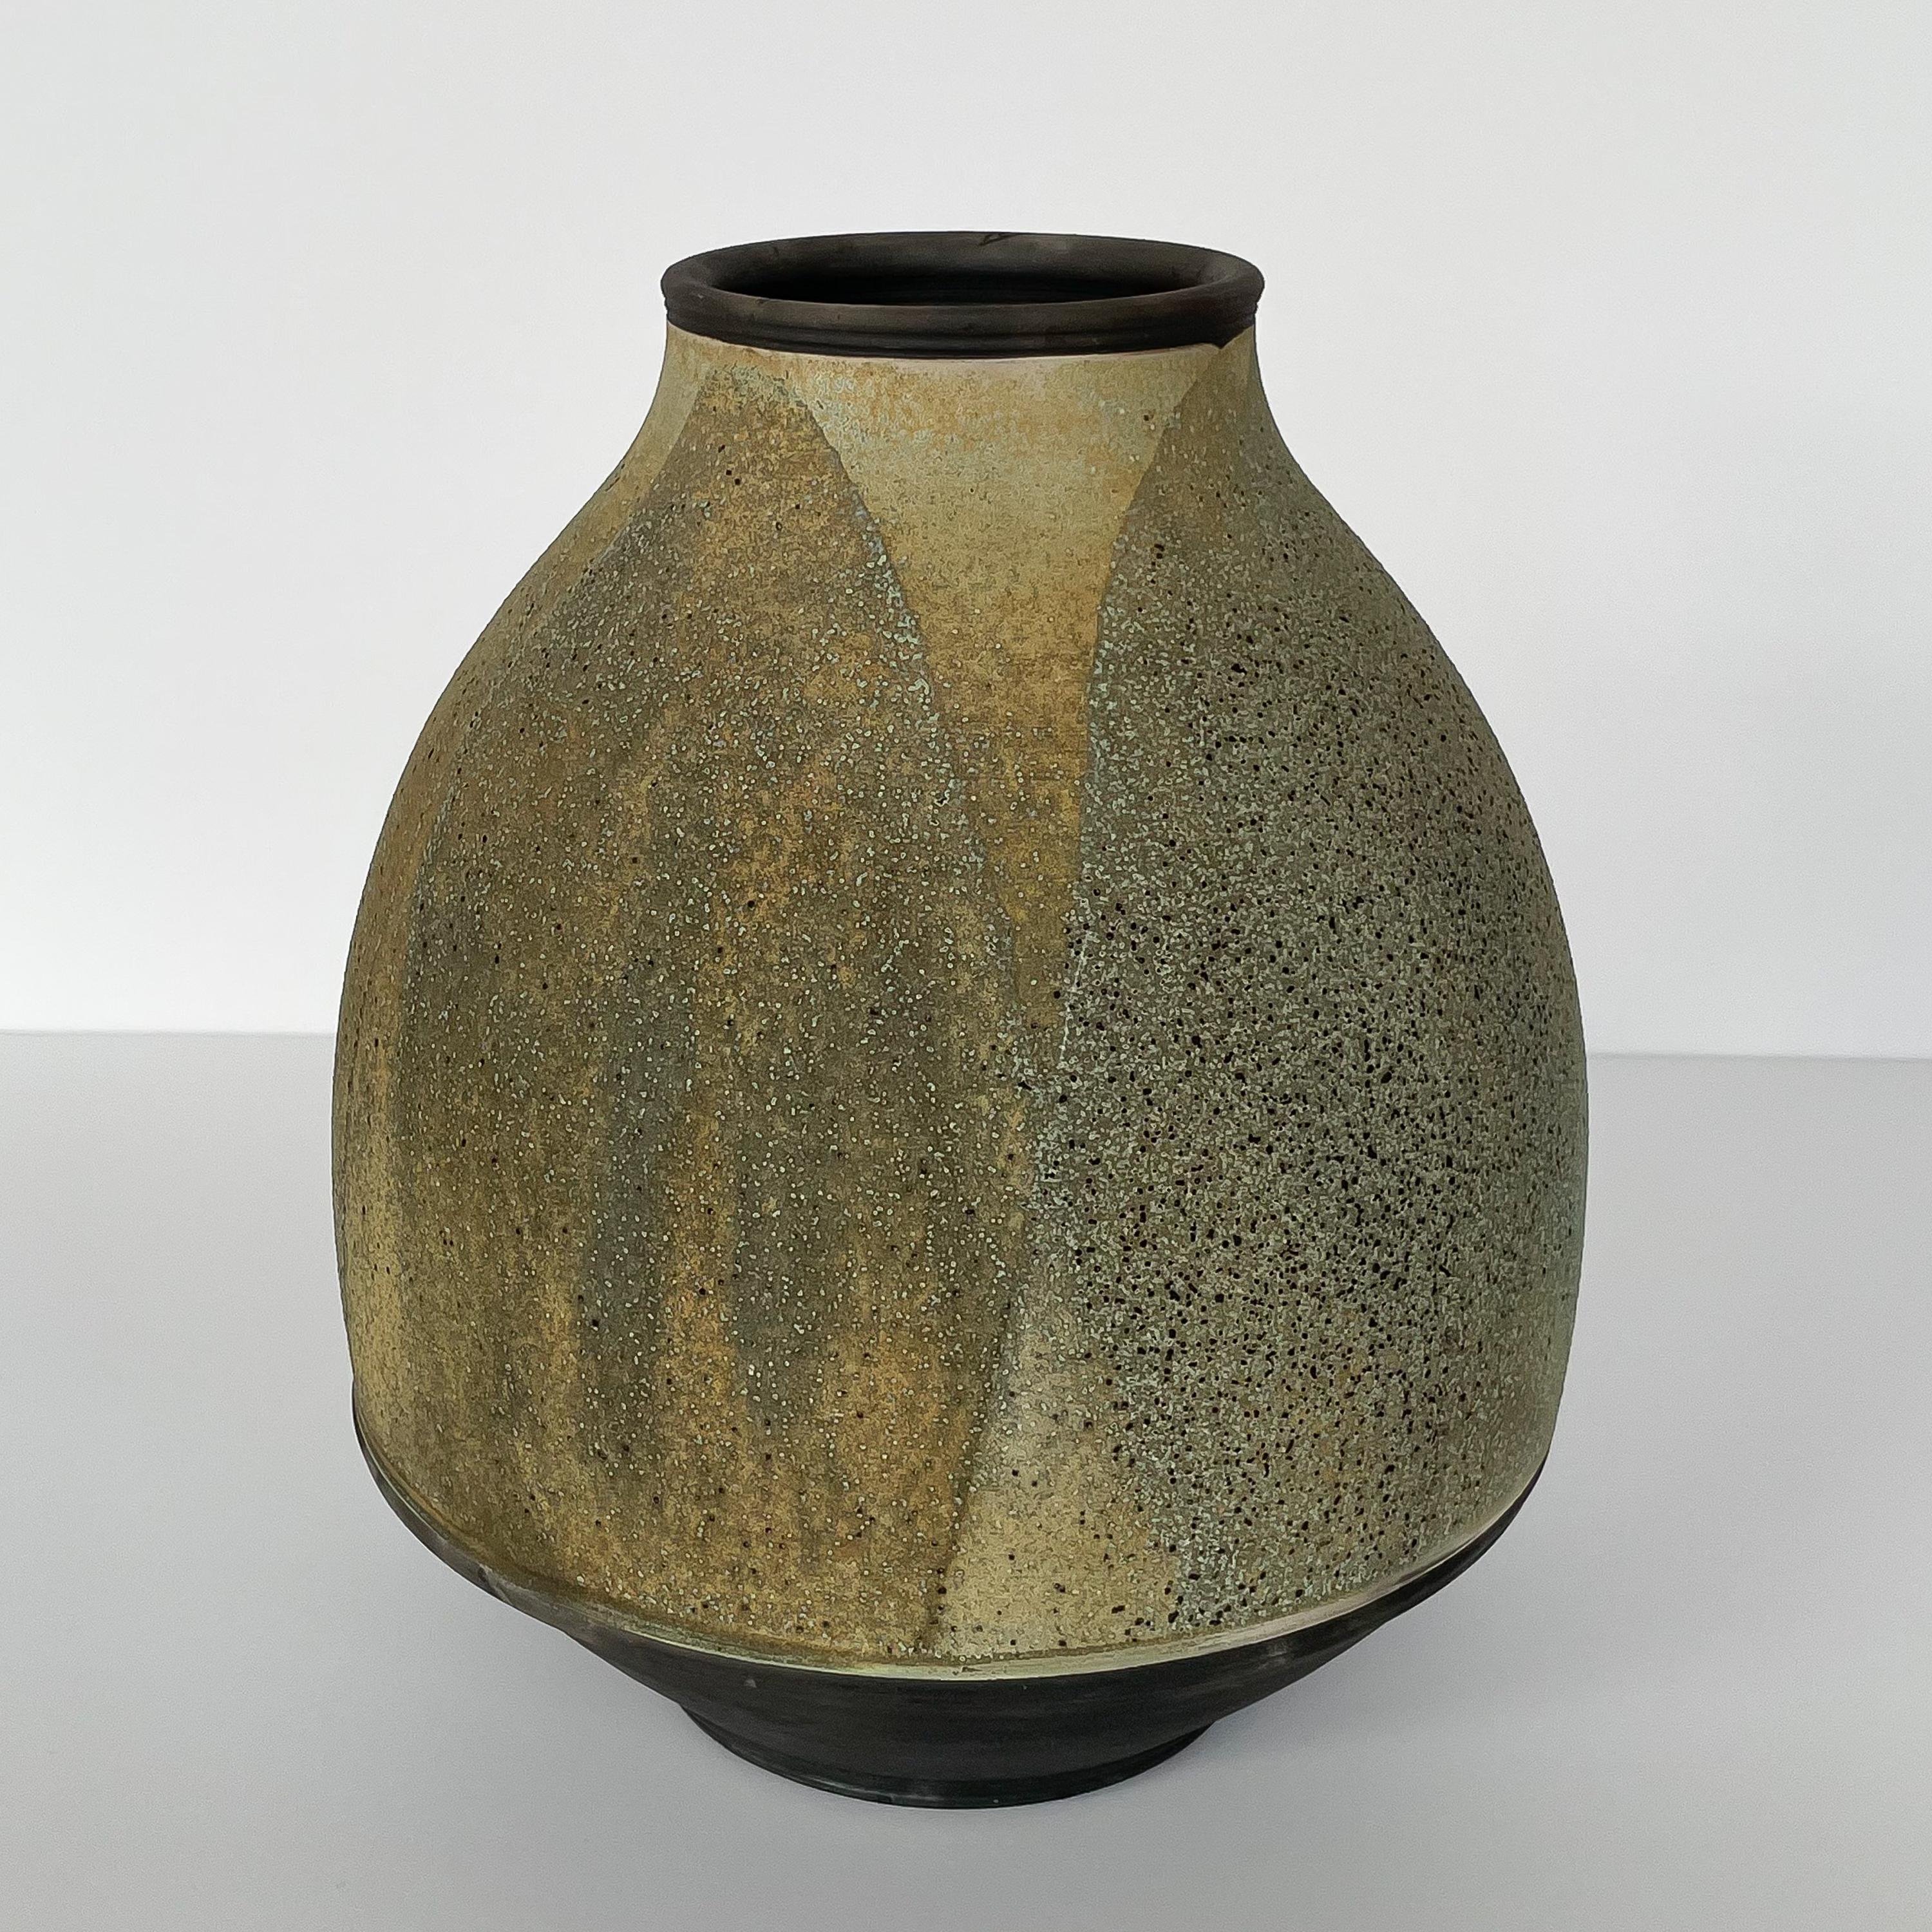 Raku fired stoneware vessel by Harvey Sadow (American, b. 1946), circa 1980s. This hand thrown ceramic vase features an abstract layered leaf-like design in pale greens and earthtones. Textured exterior glaze. Artist insignia to underside. Measures: